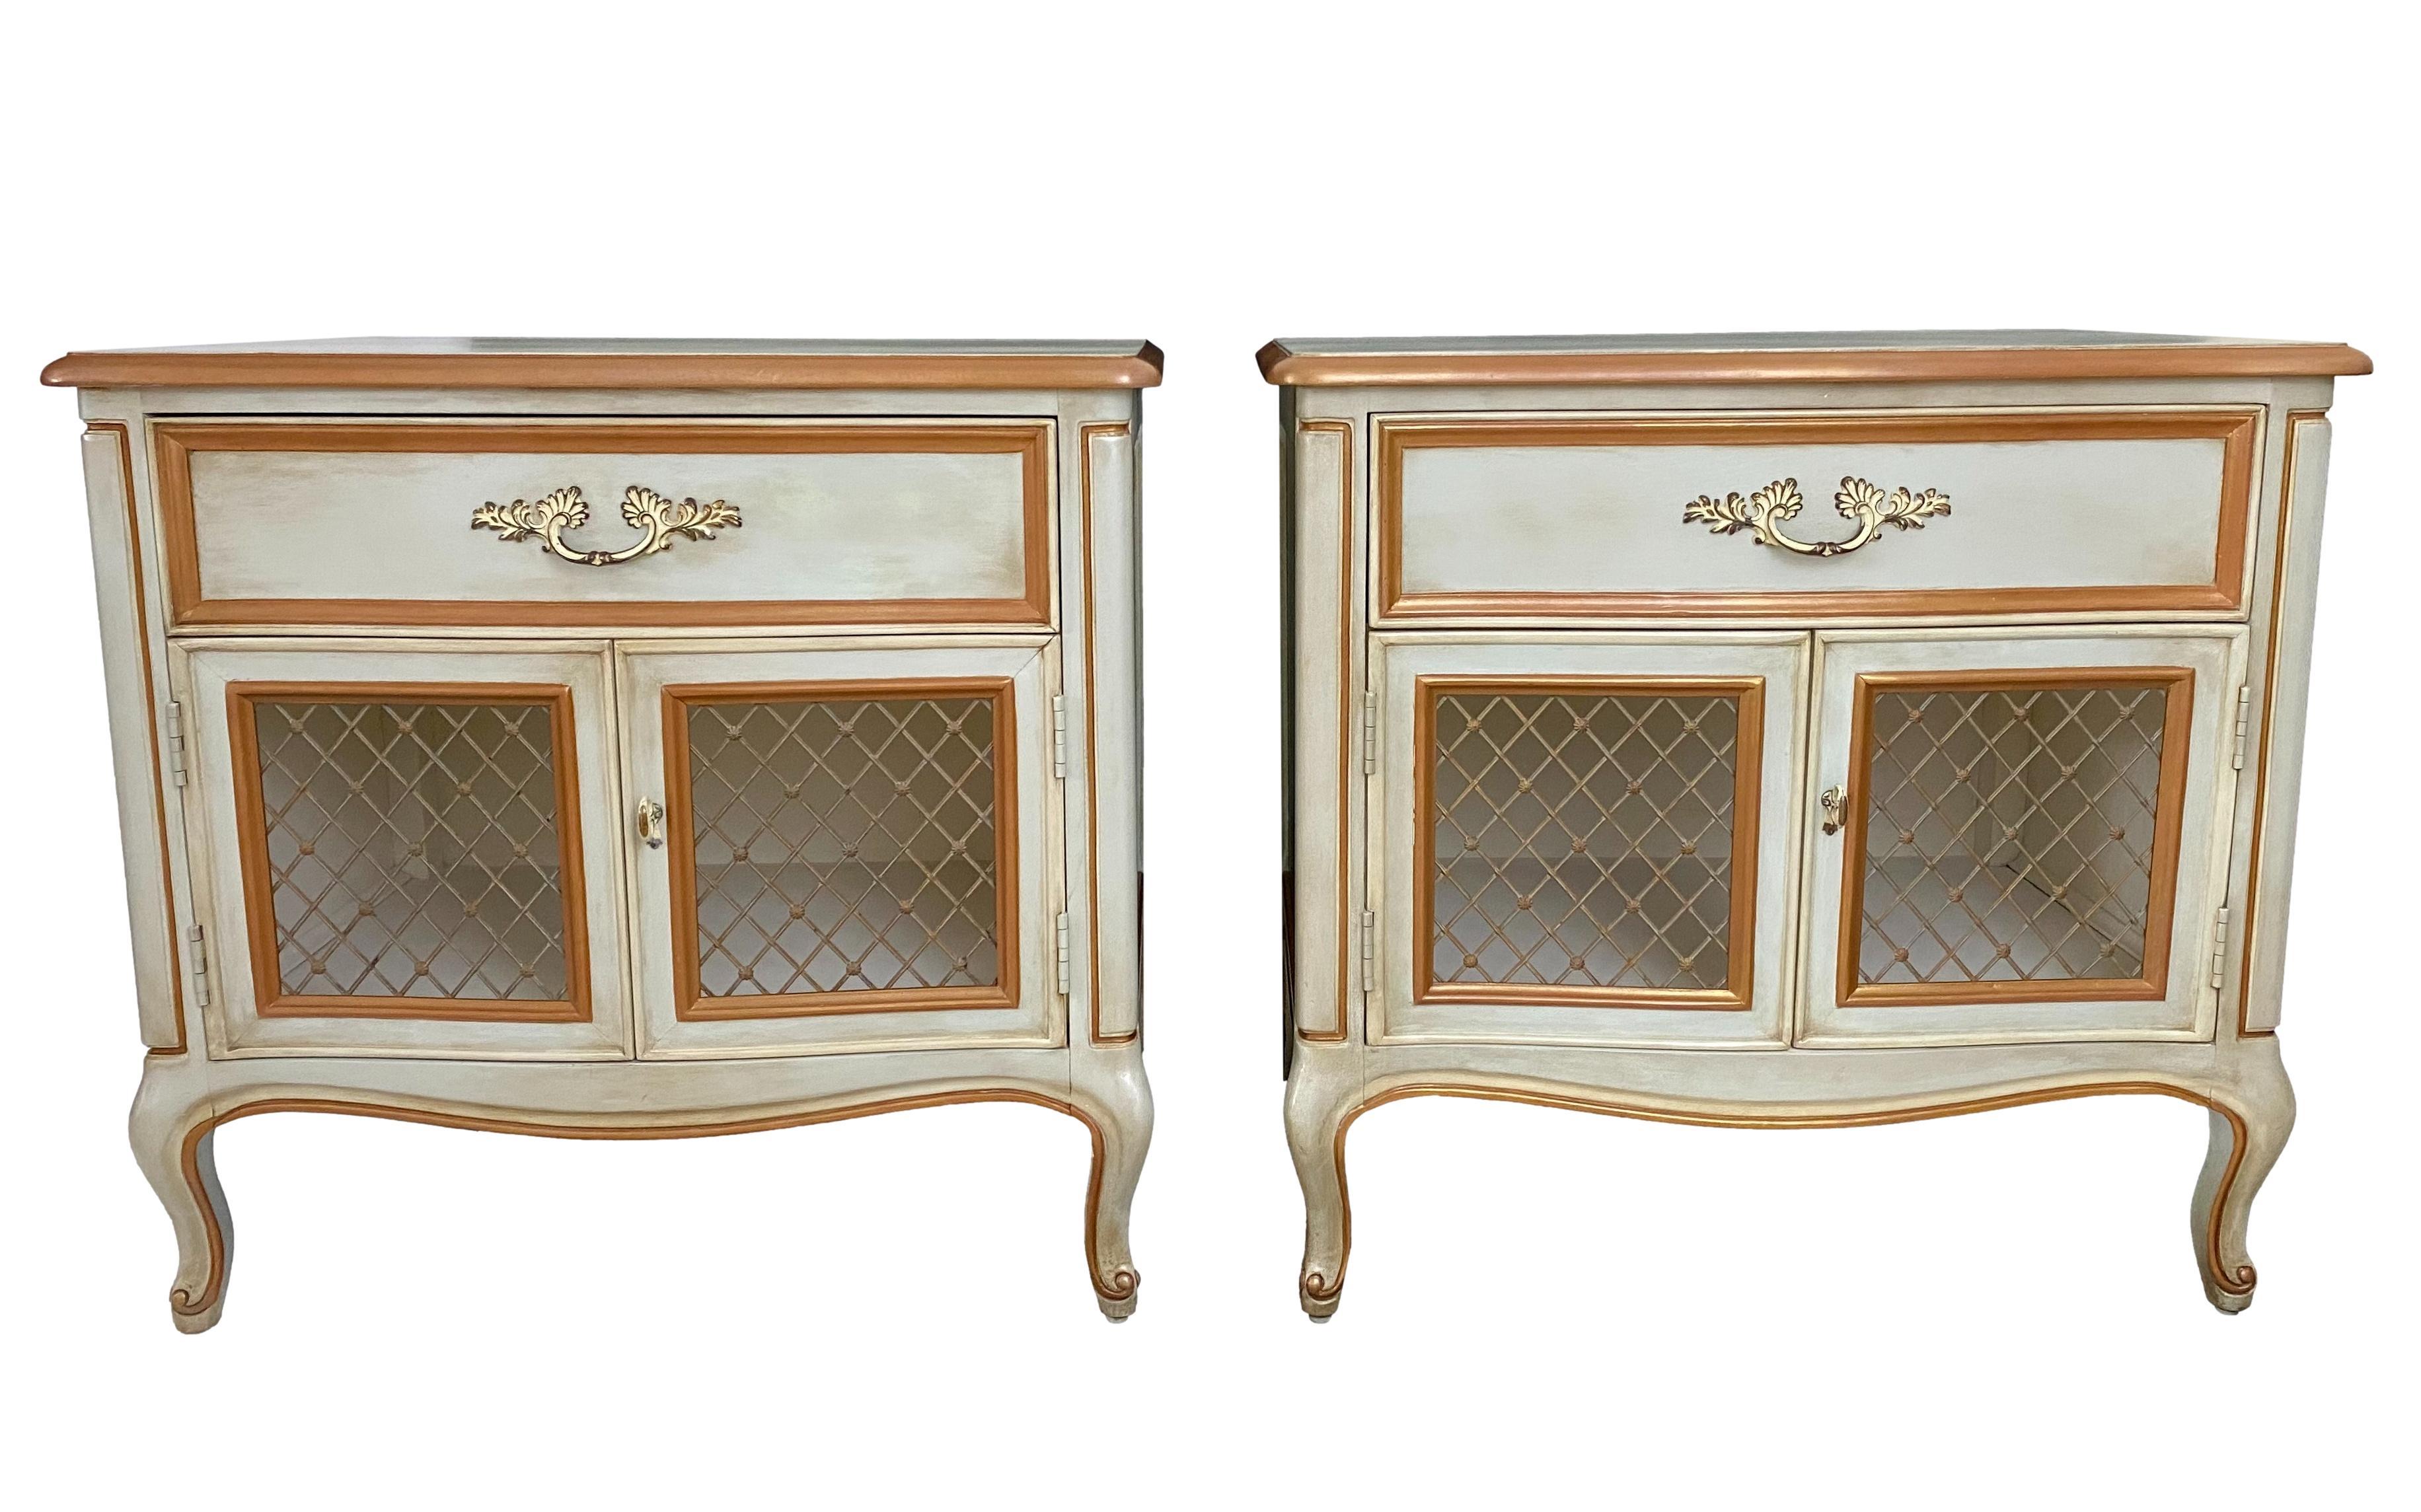 A pair of 1970's French Louis XV provincial style nightstands by Henredon. Refinished in pale blue green with gold & cream details, pearlescent highlights, wax distressing and a smooth satin finish; brass hardware.

Dimensions: 26